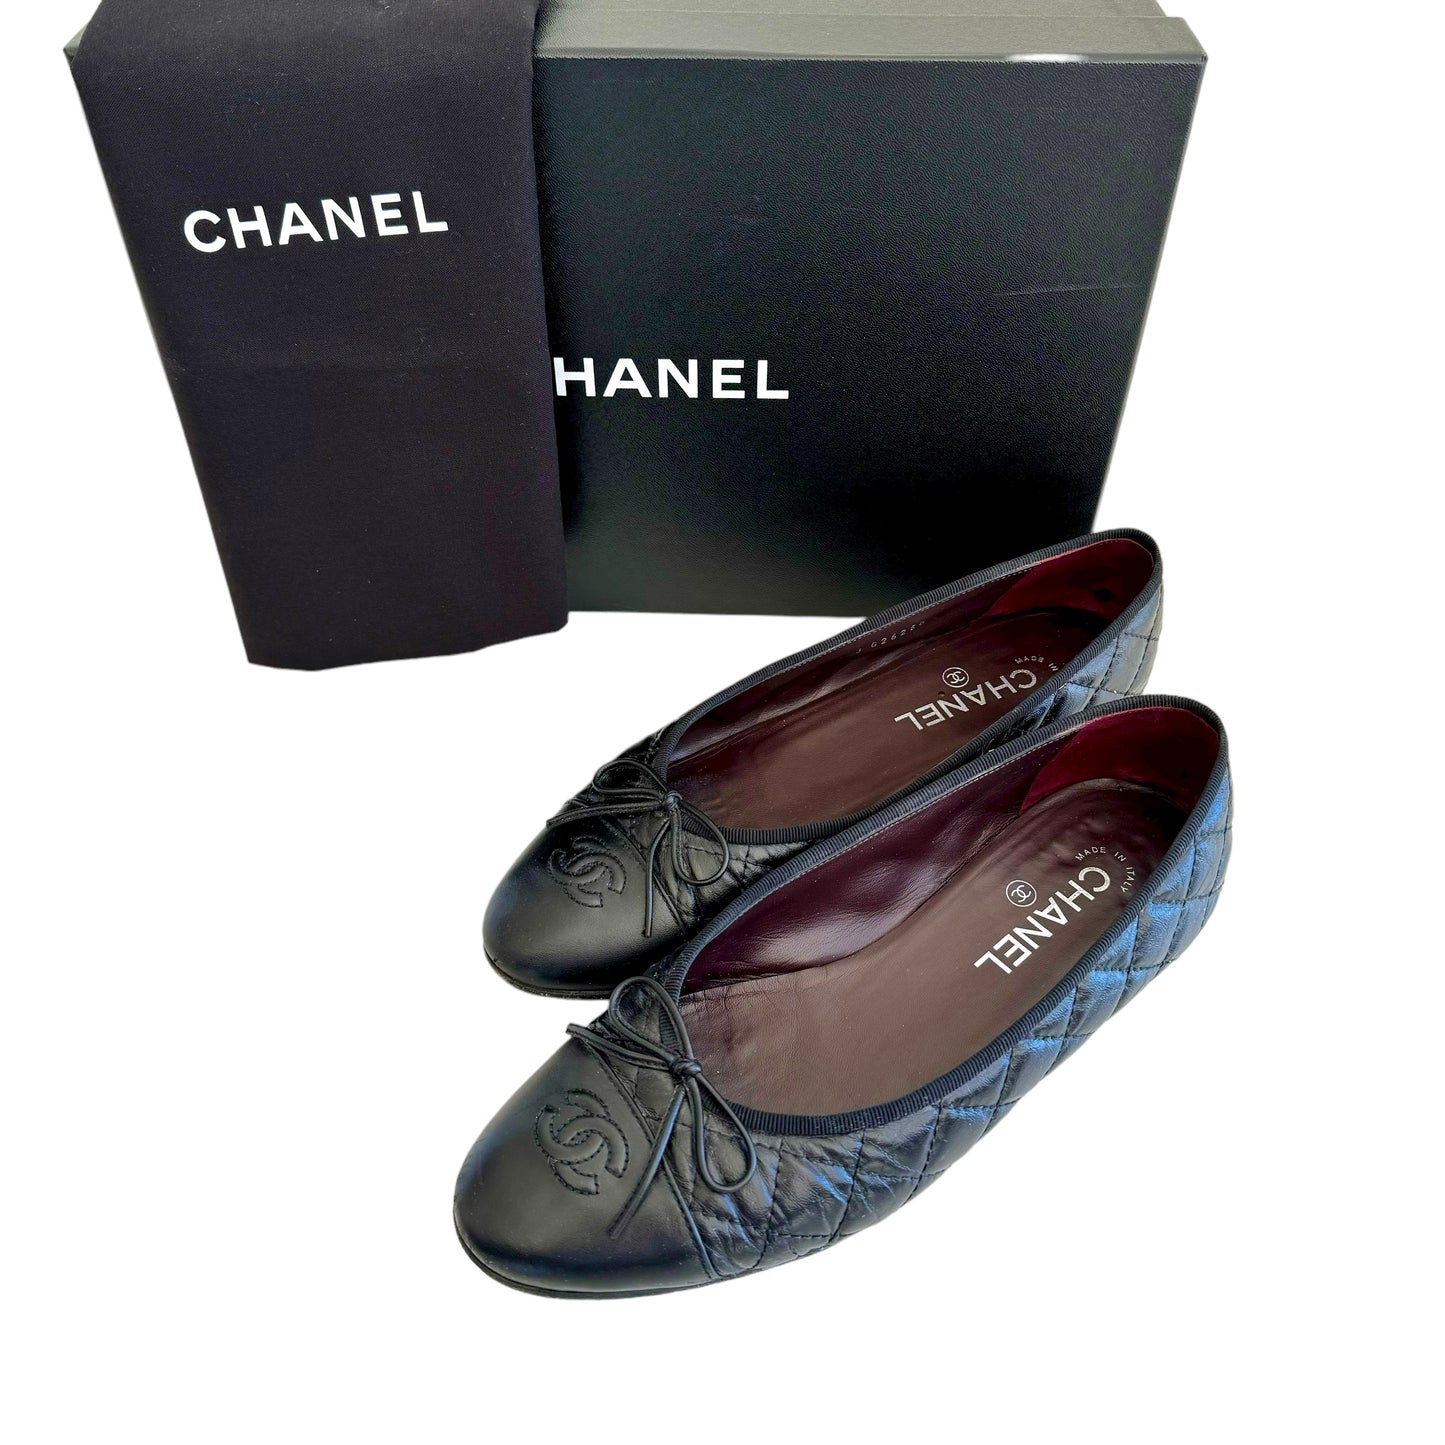 Chanel Ballet Flats in Black Caviar Leather Size 40 with Package